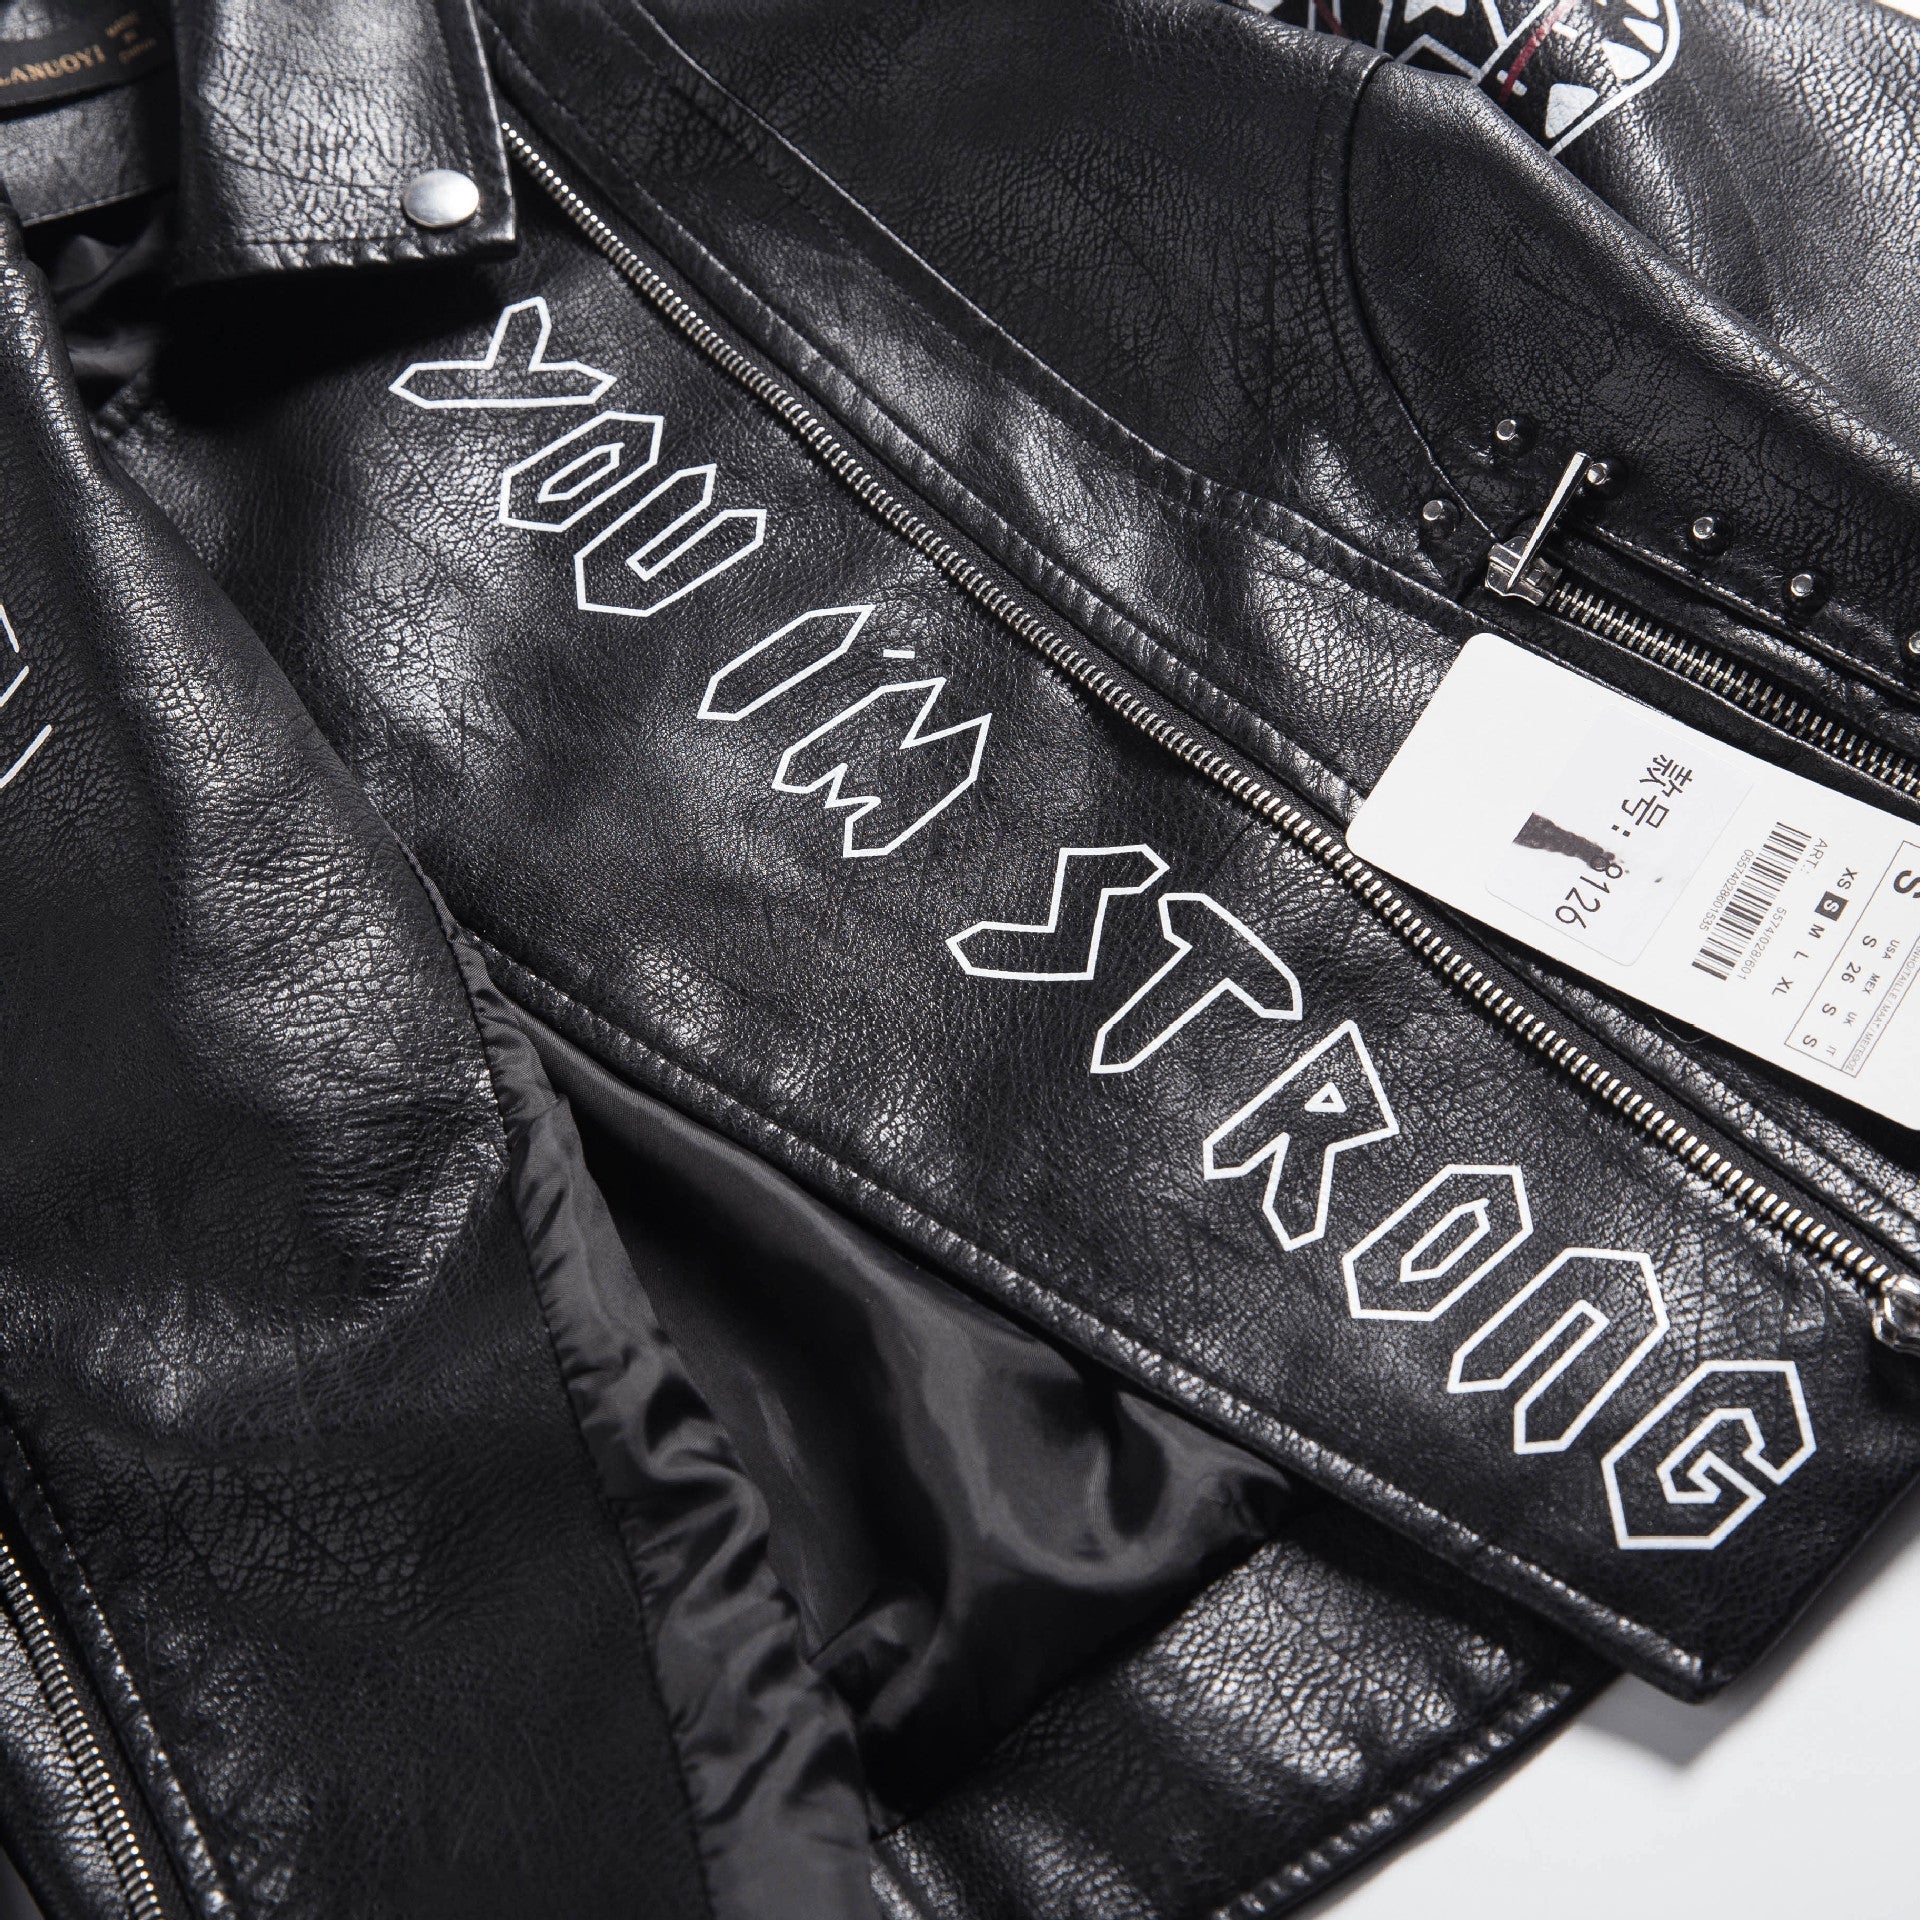 Rocker Girl Outfit / Faux Soft Leather Motorcycle Jacket - HARD'N'HEAVY